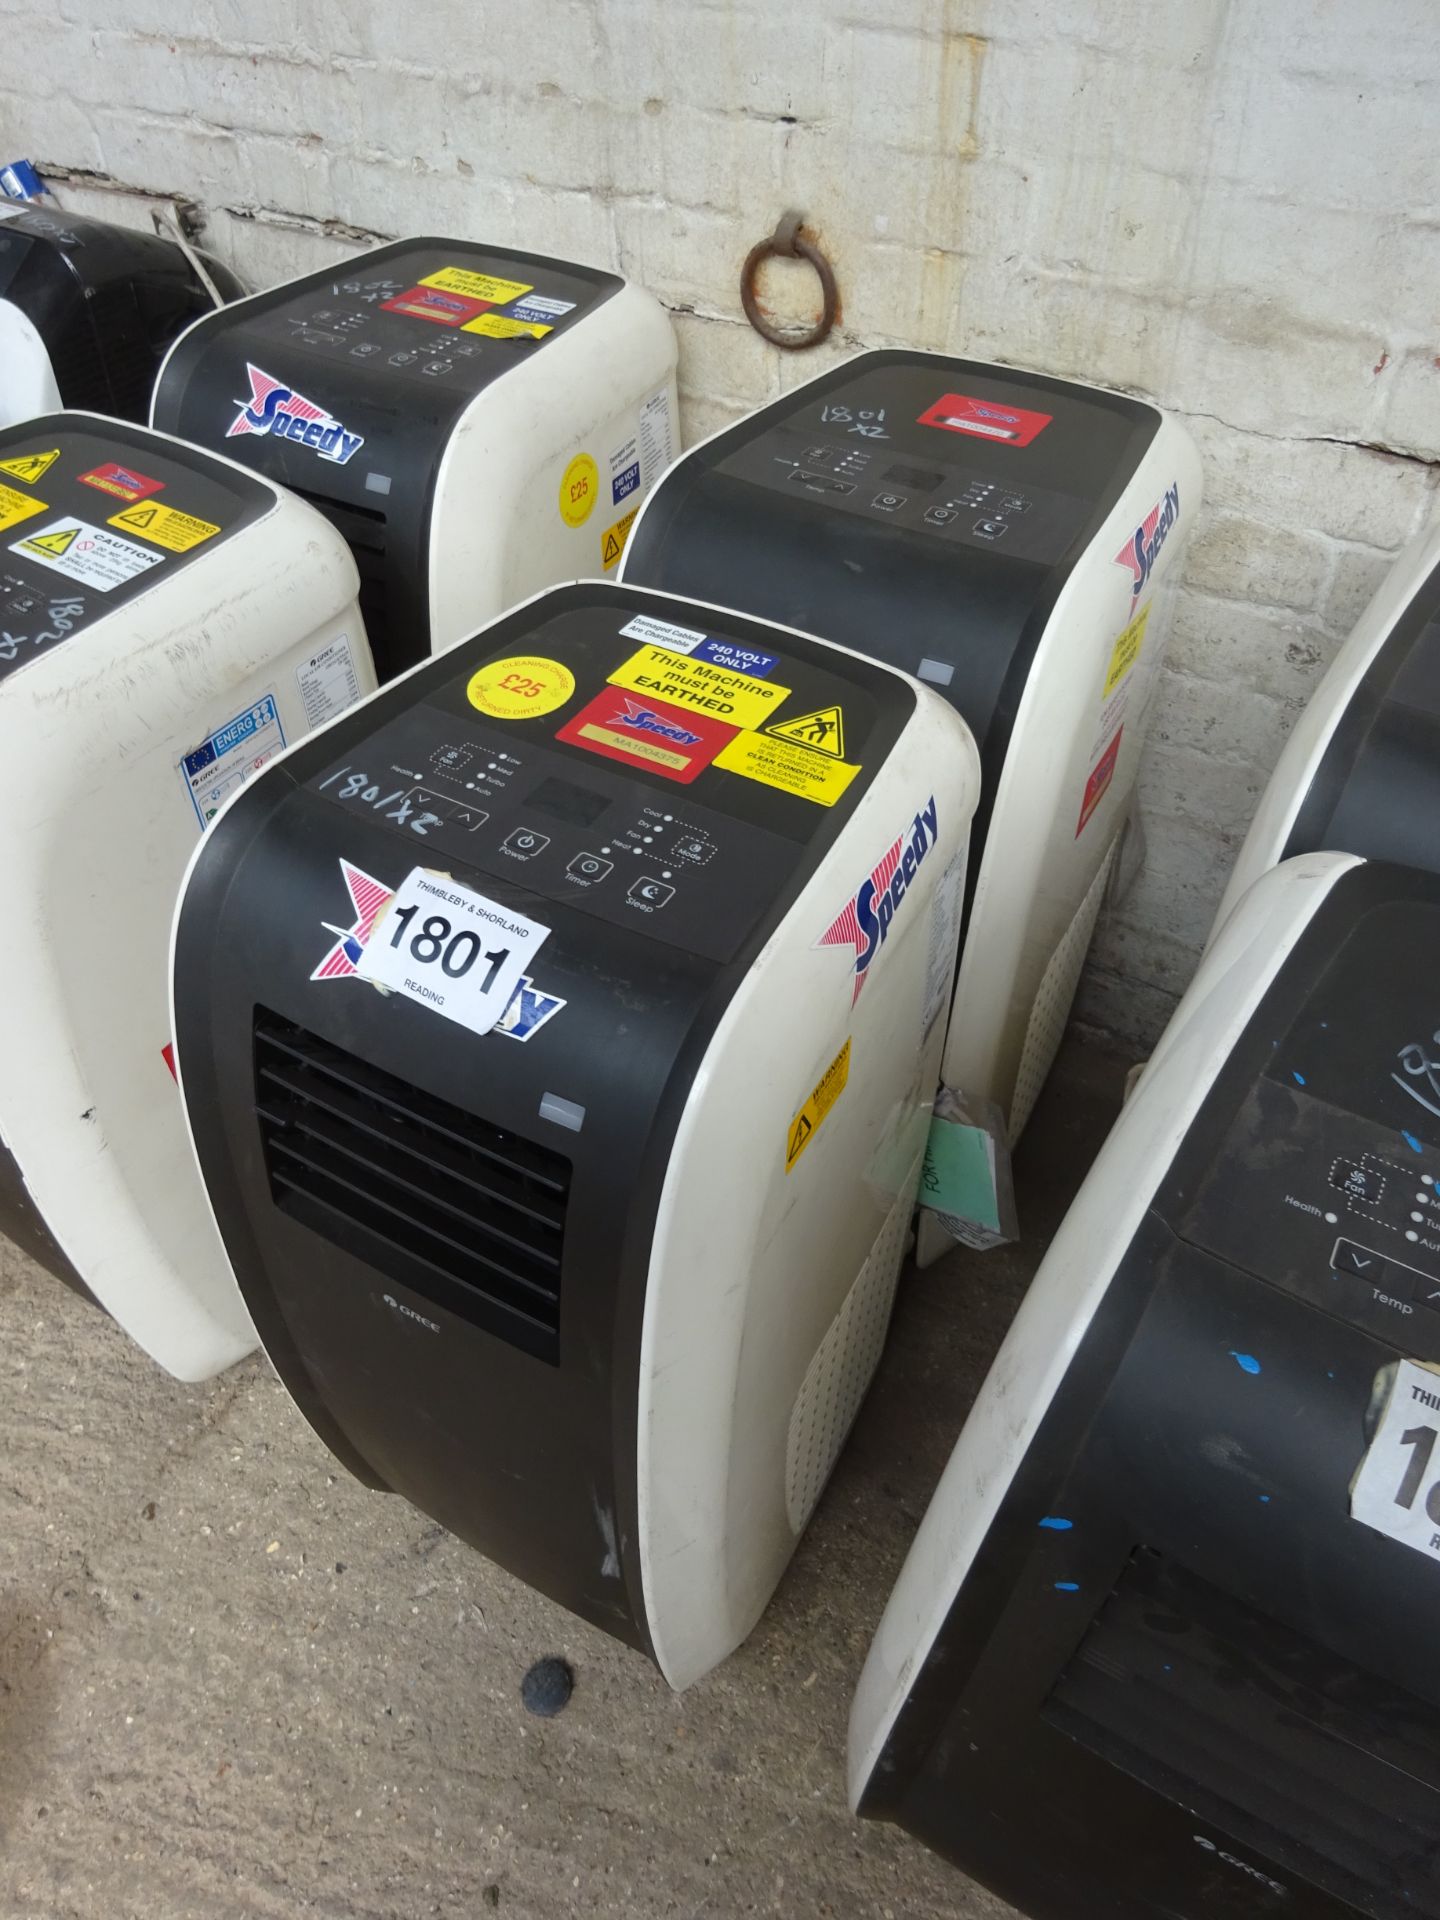 2 Gree air conditioning units